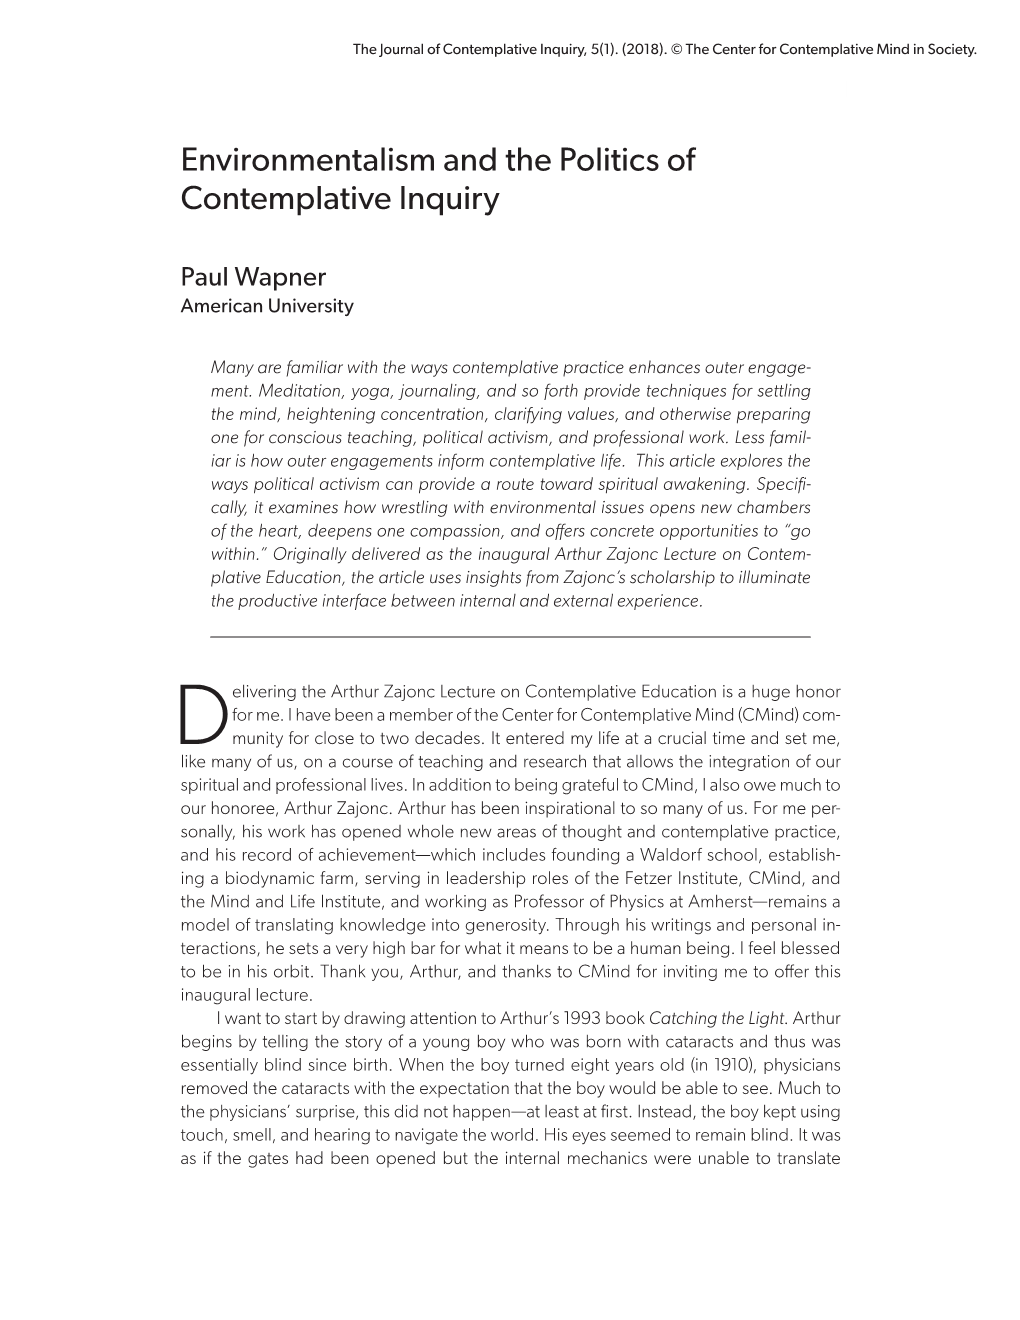 Environmentalism and the Politics of Contemplative Inquiry